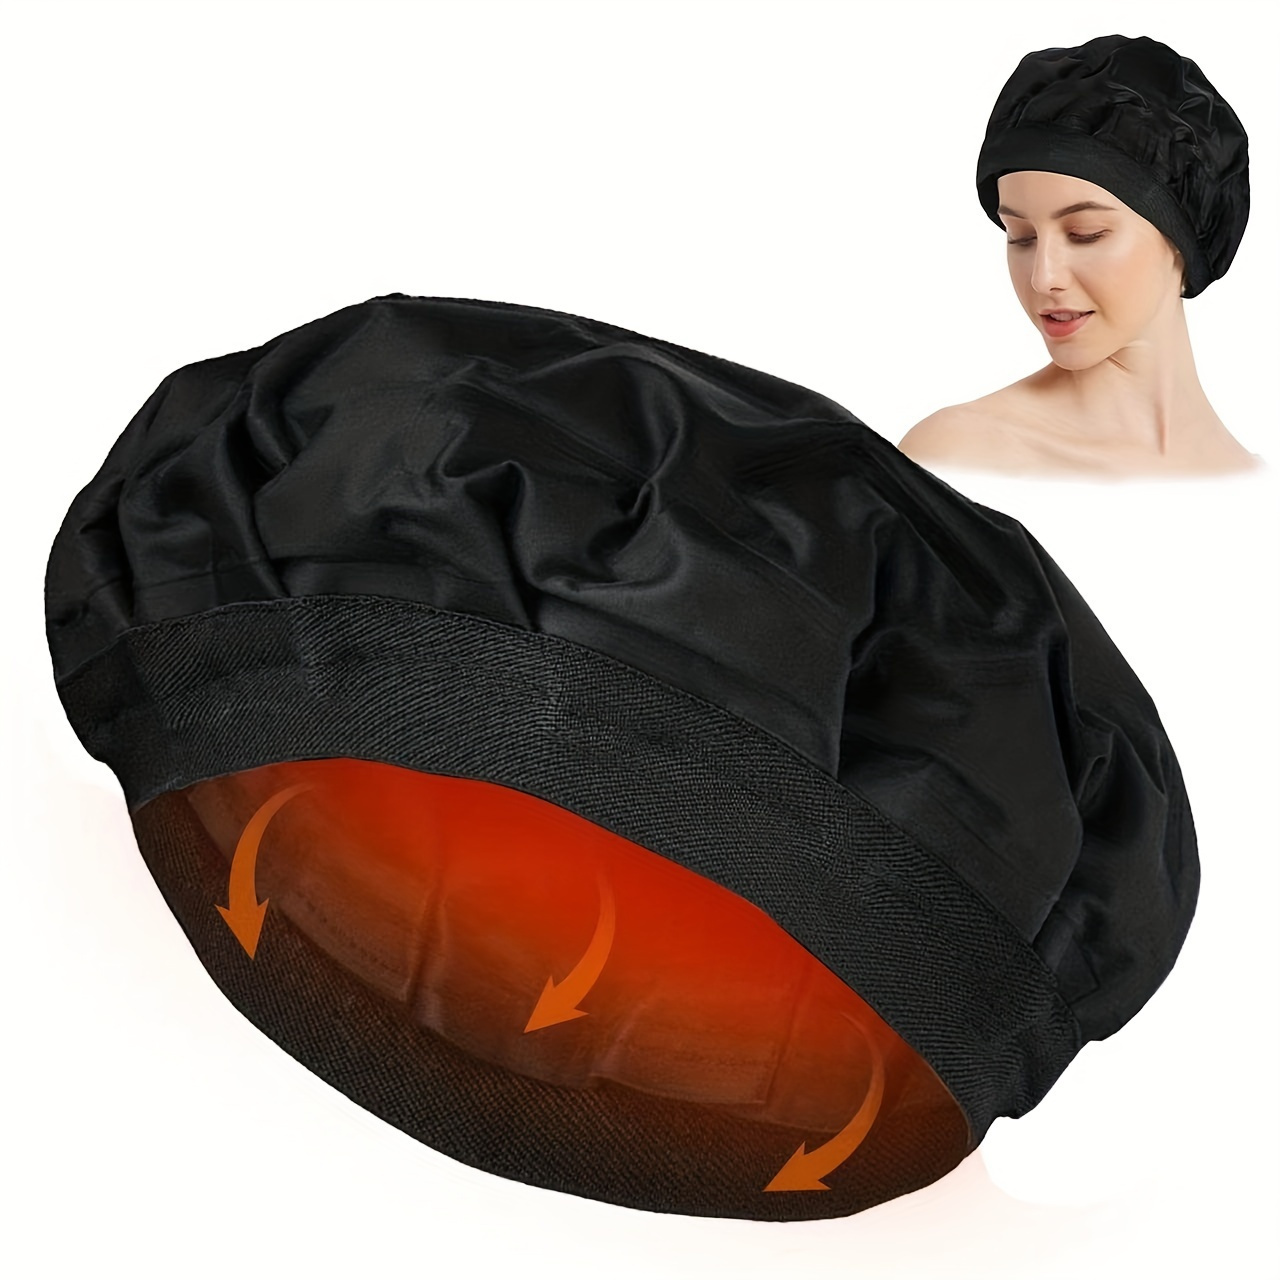 

1pc Deep Conditioning Hot Cap Without Cord Steamer Deep Hair Care Cap, Useful Practical Convenient Professional Hair Styling And Care Steam Cap